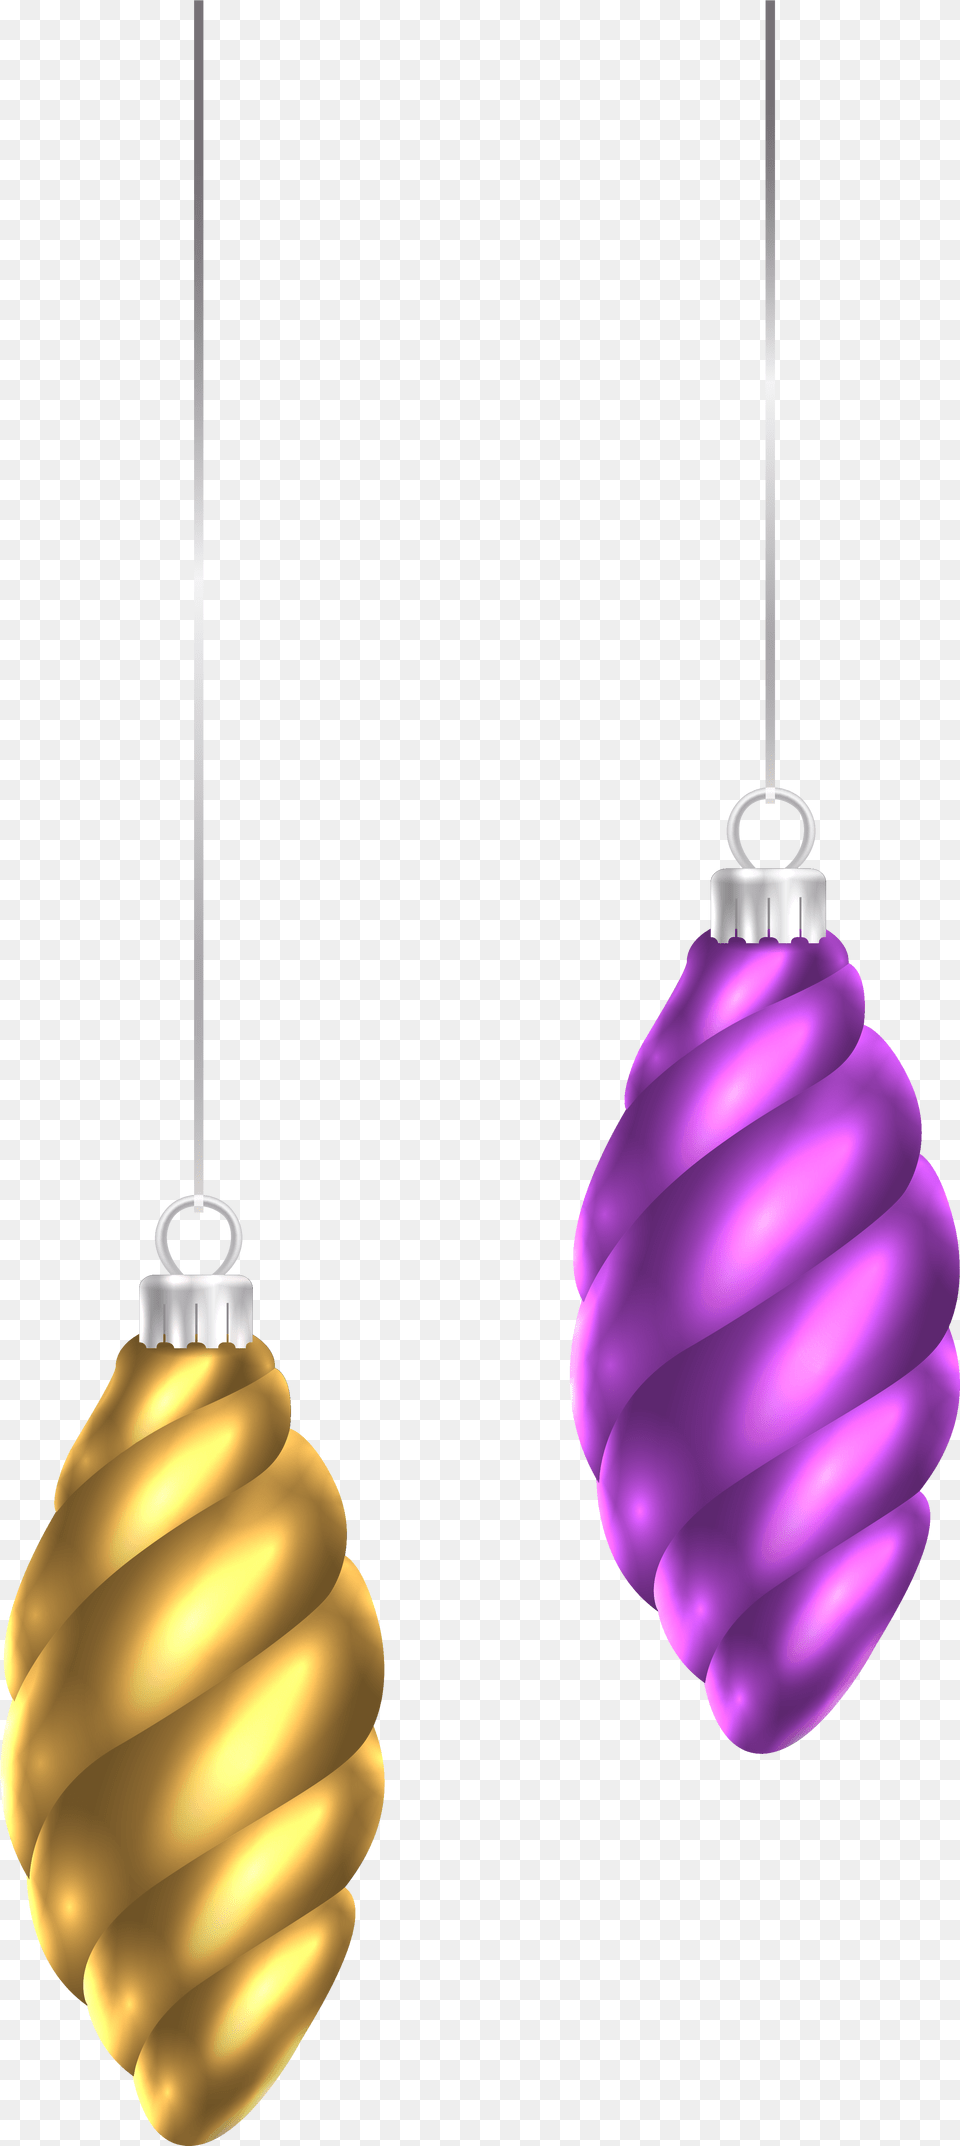 Christmas Ornaments Clip Art Image Transparent Ornaments, Light, Accessories, Lighting Free Png